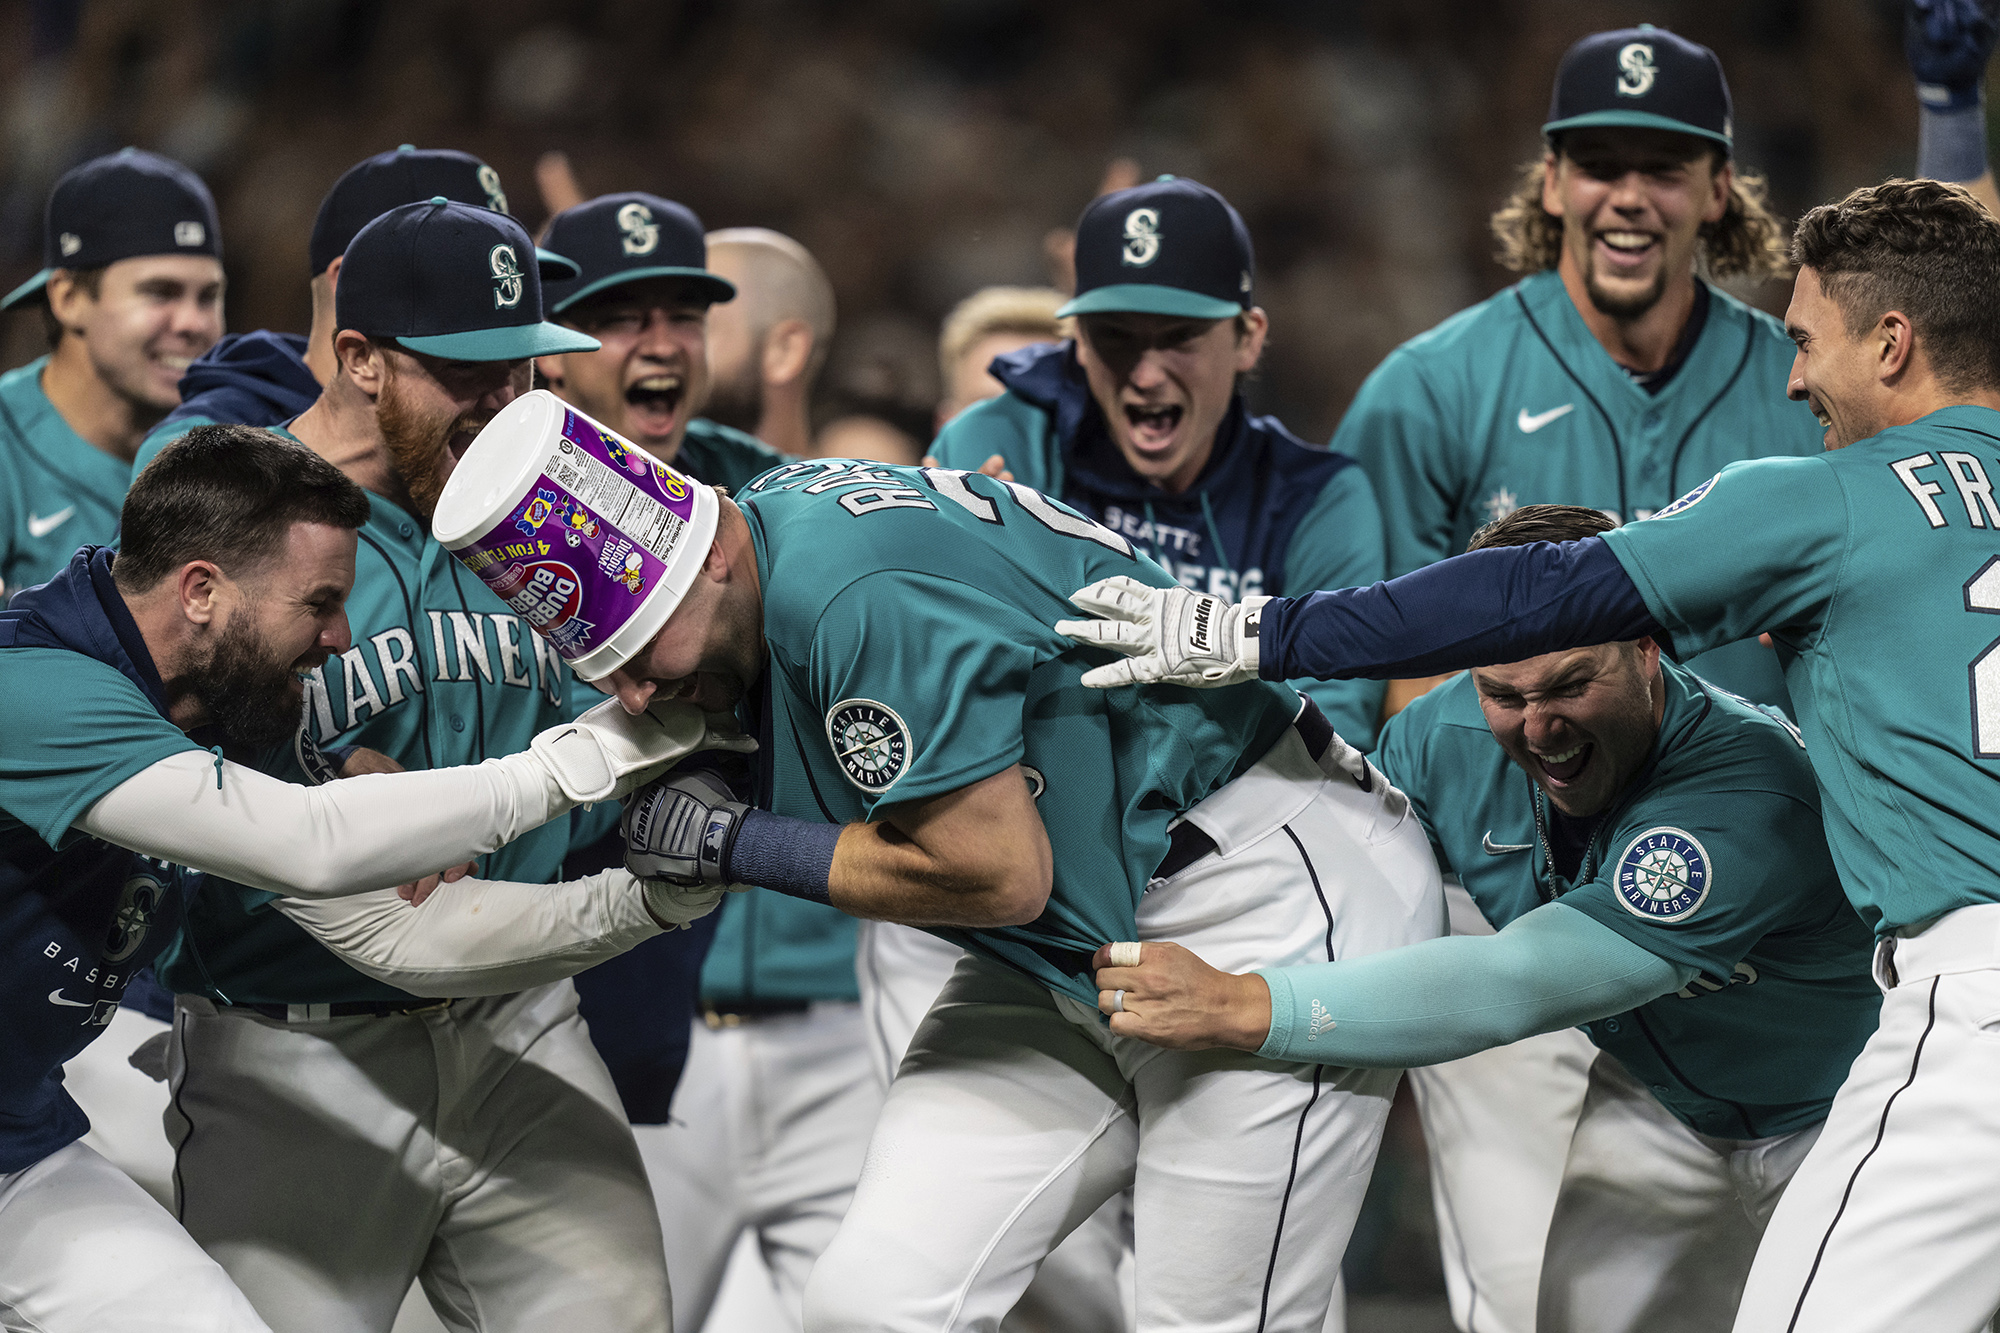 Raleigh's walk-off homer ends Mariners' long playoff drought - The Columbian